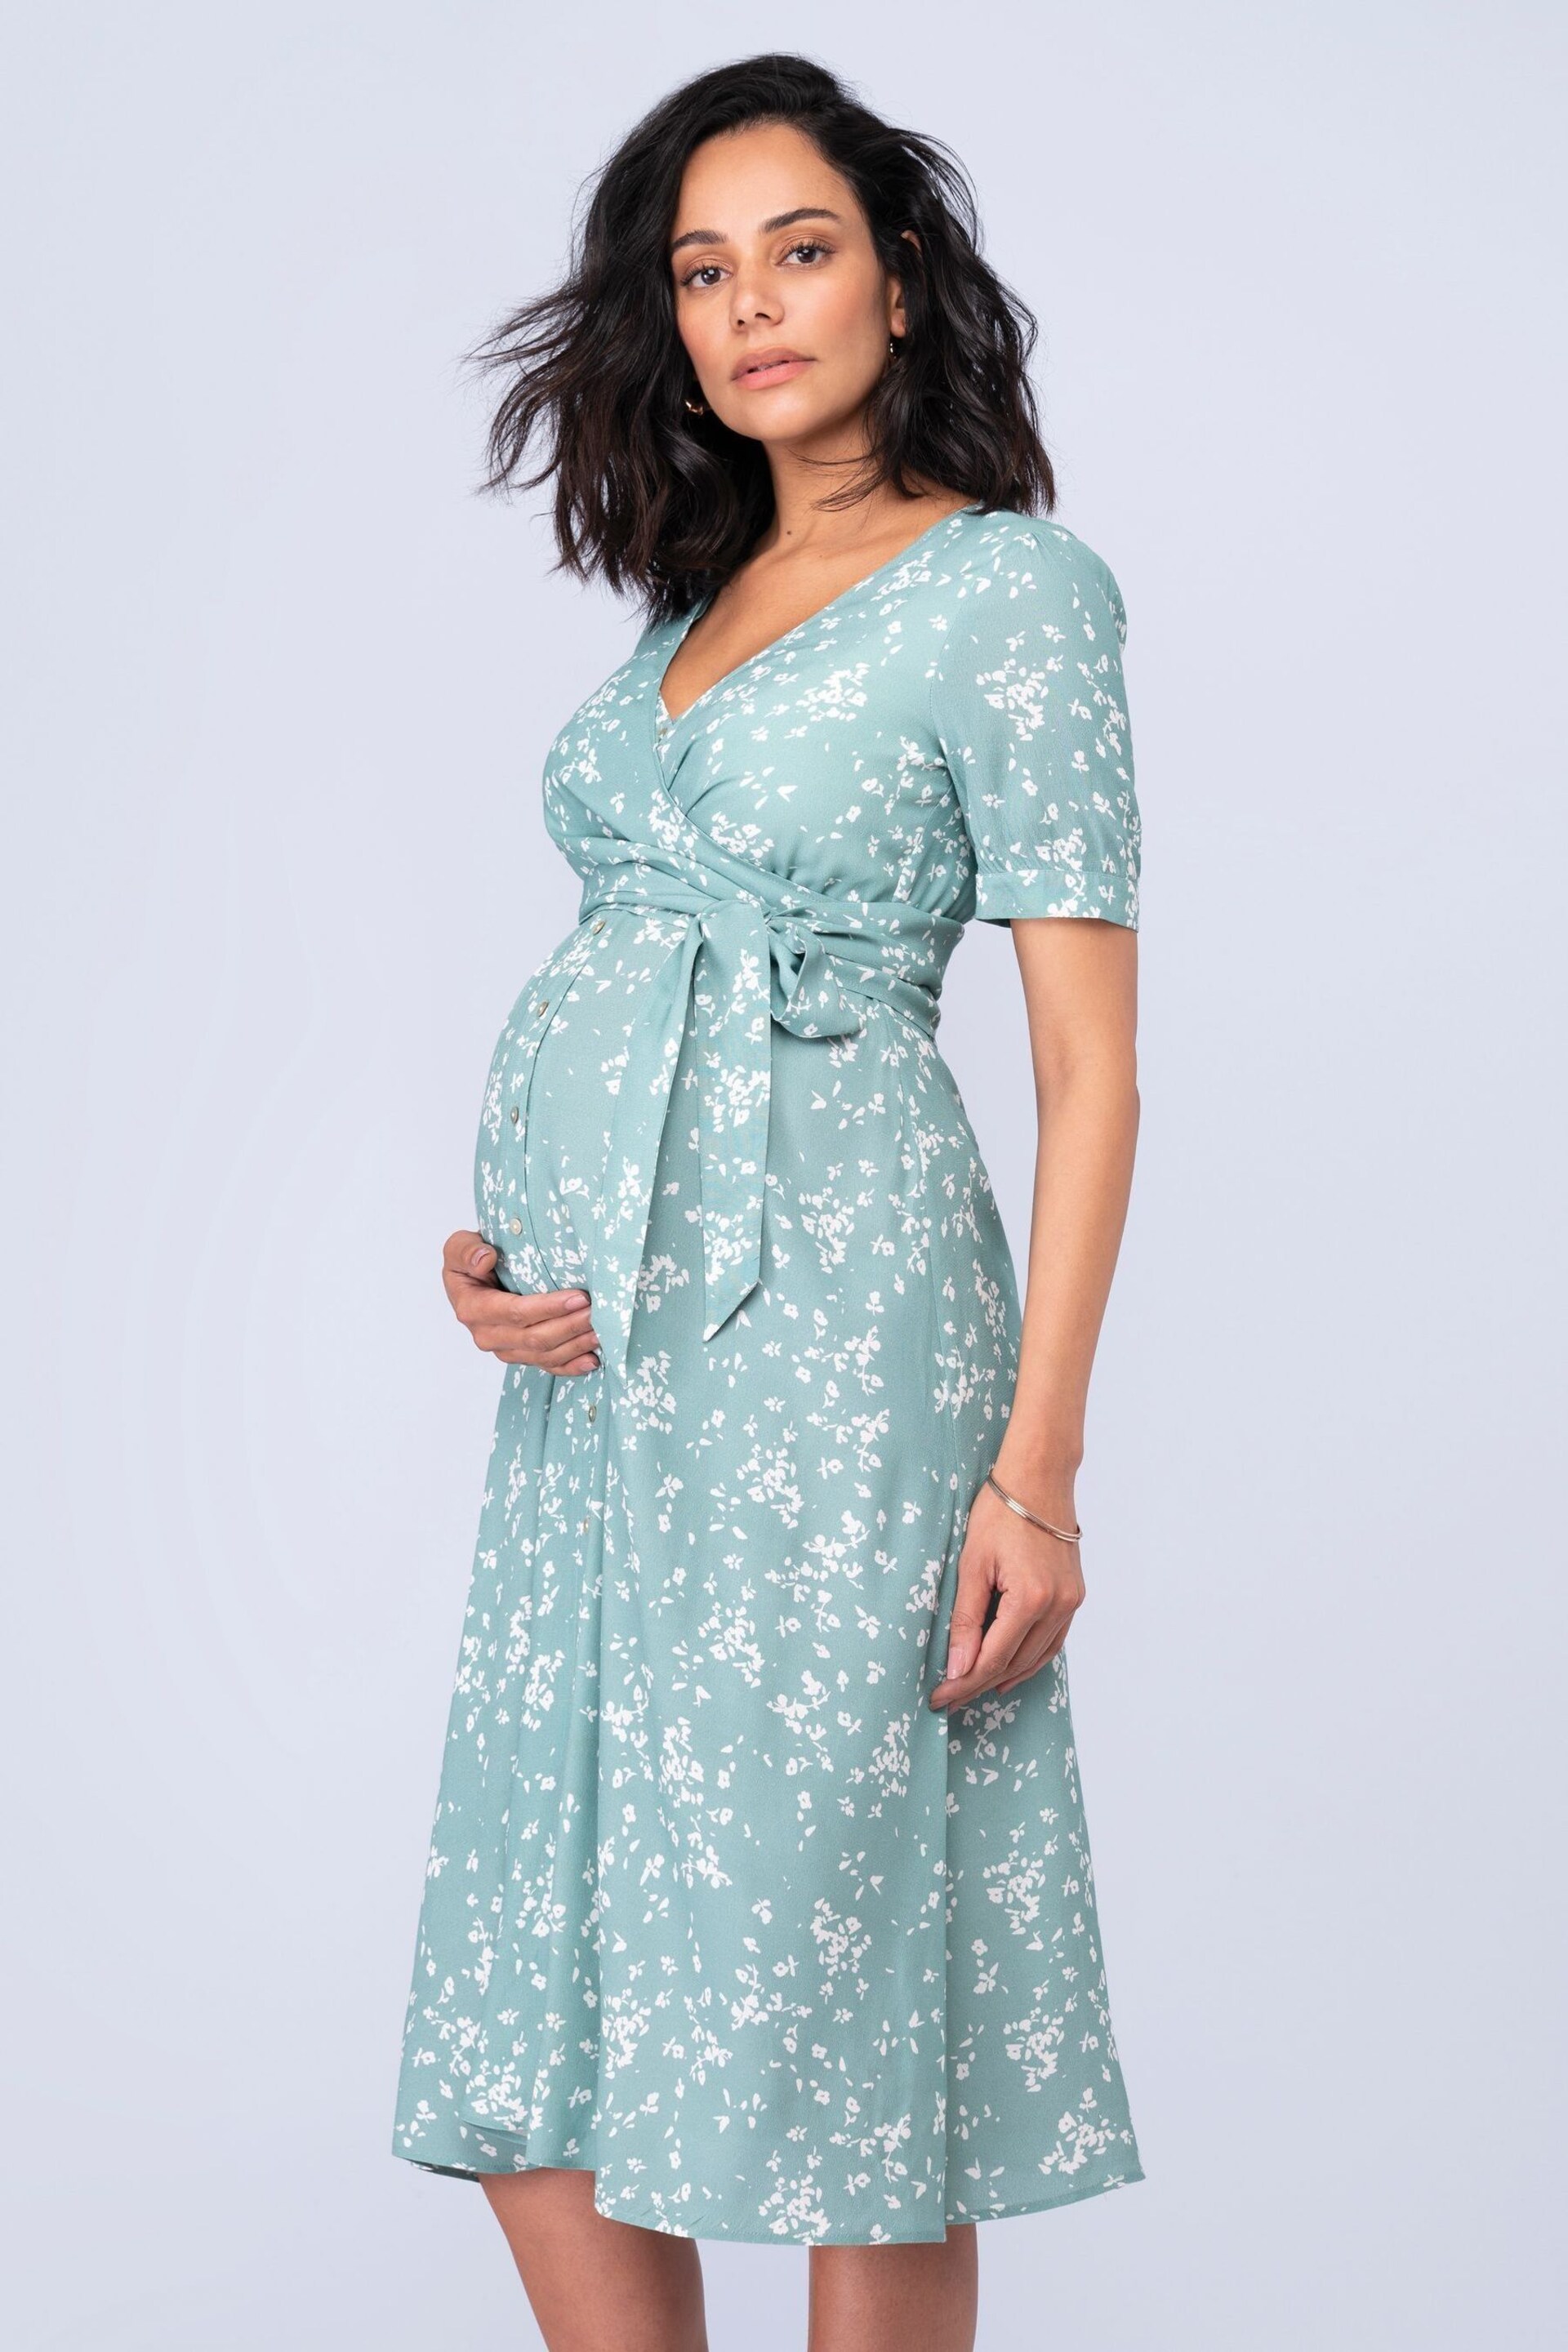 Seraphine Sage Green Floral Maternity And Nursing Midi Dress - Image 1 of 5